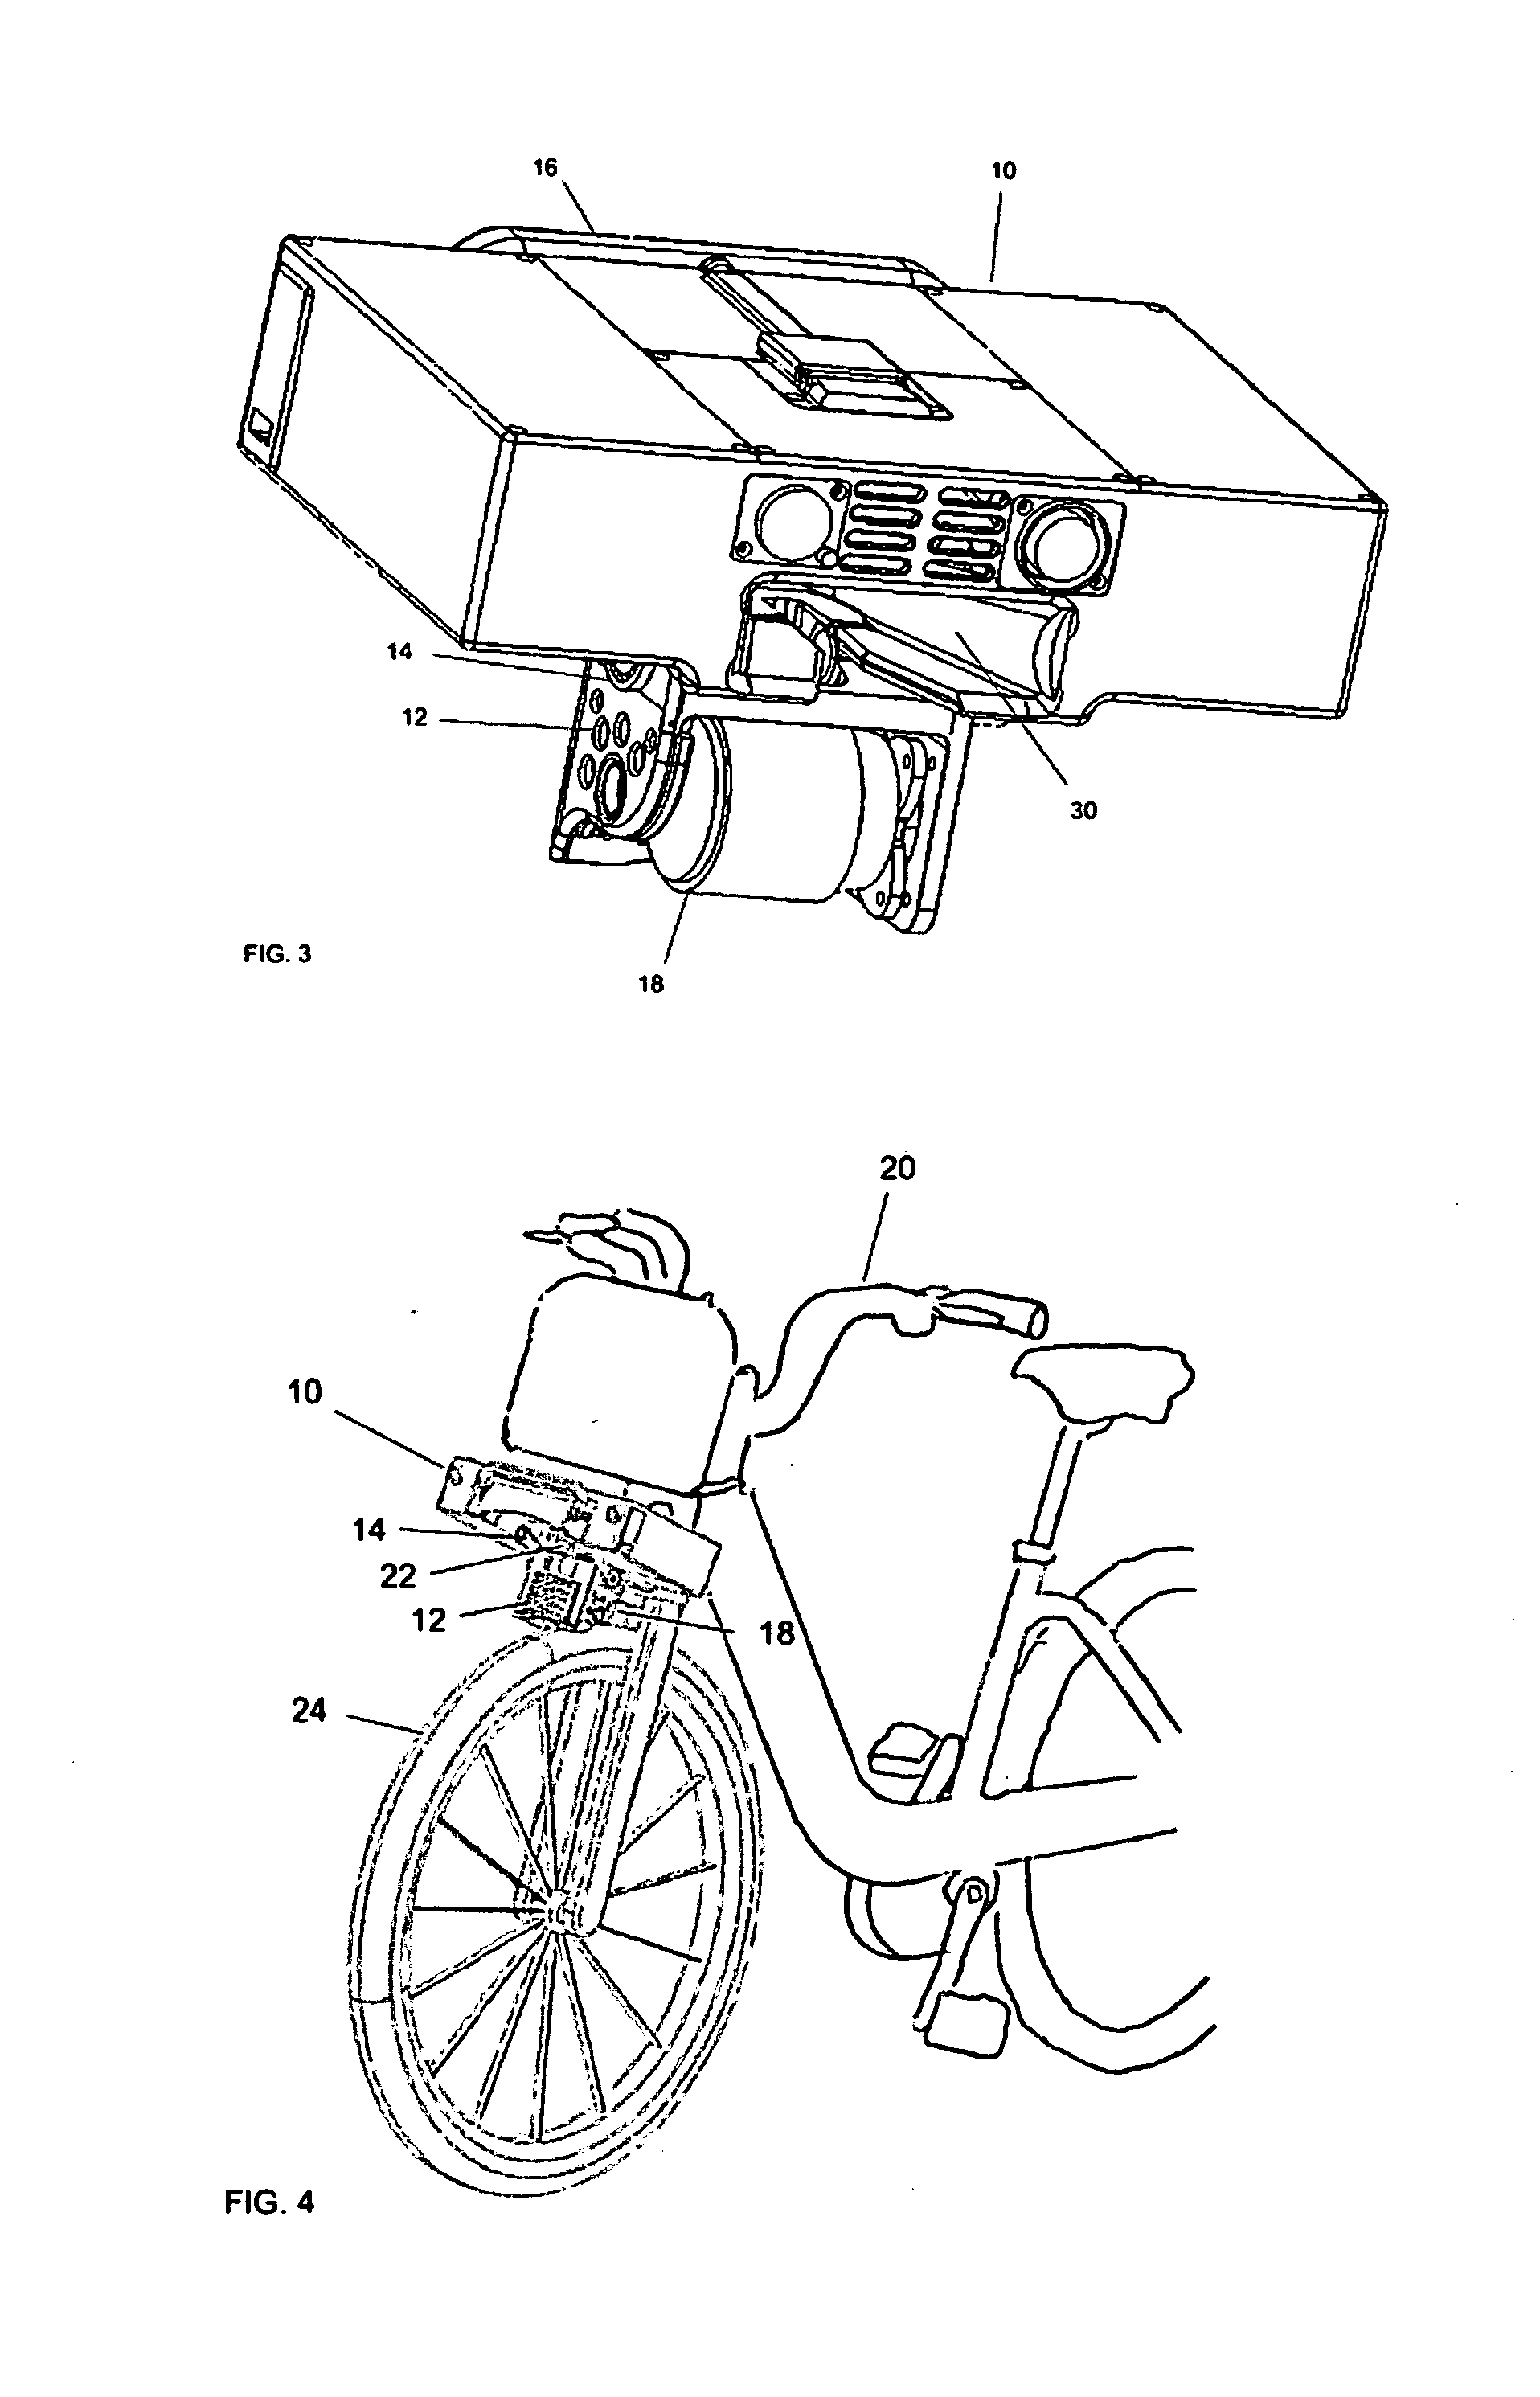 Portable Multi-Platform Friction Drive System with Retractable Motor Drive Assembly